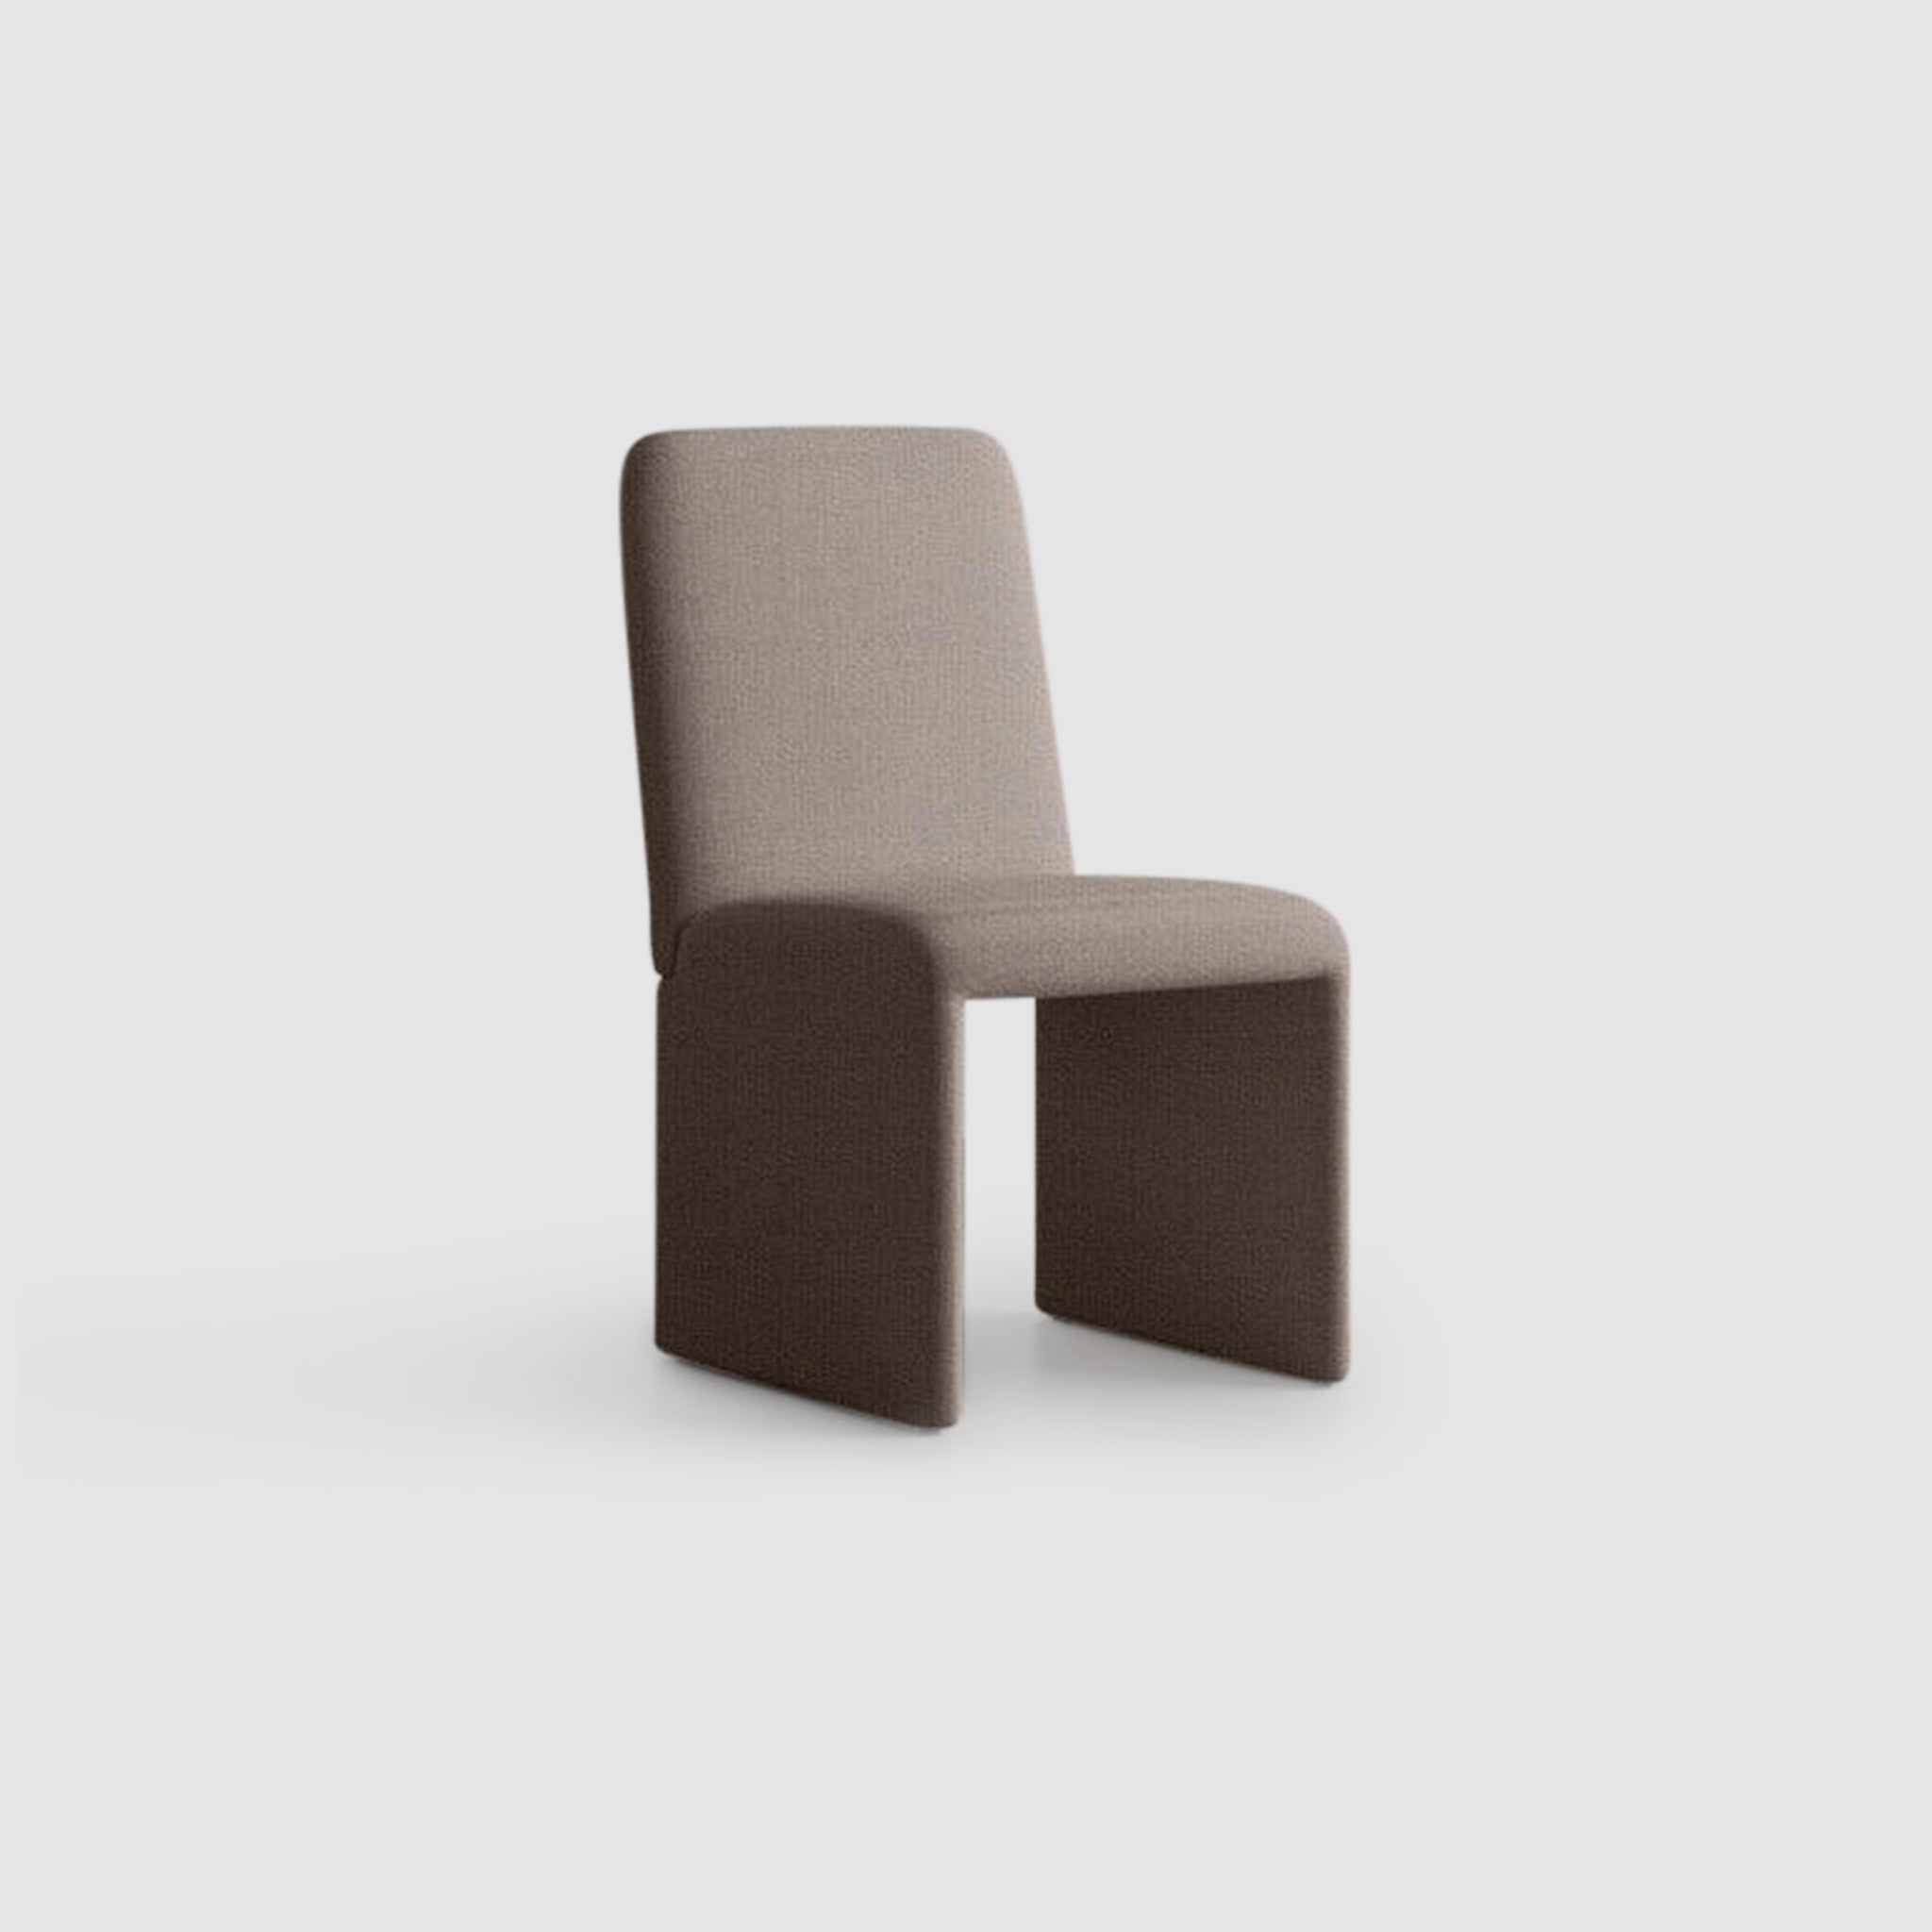 Elegant brown fabric dining chair with clean lines